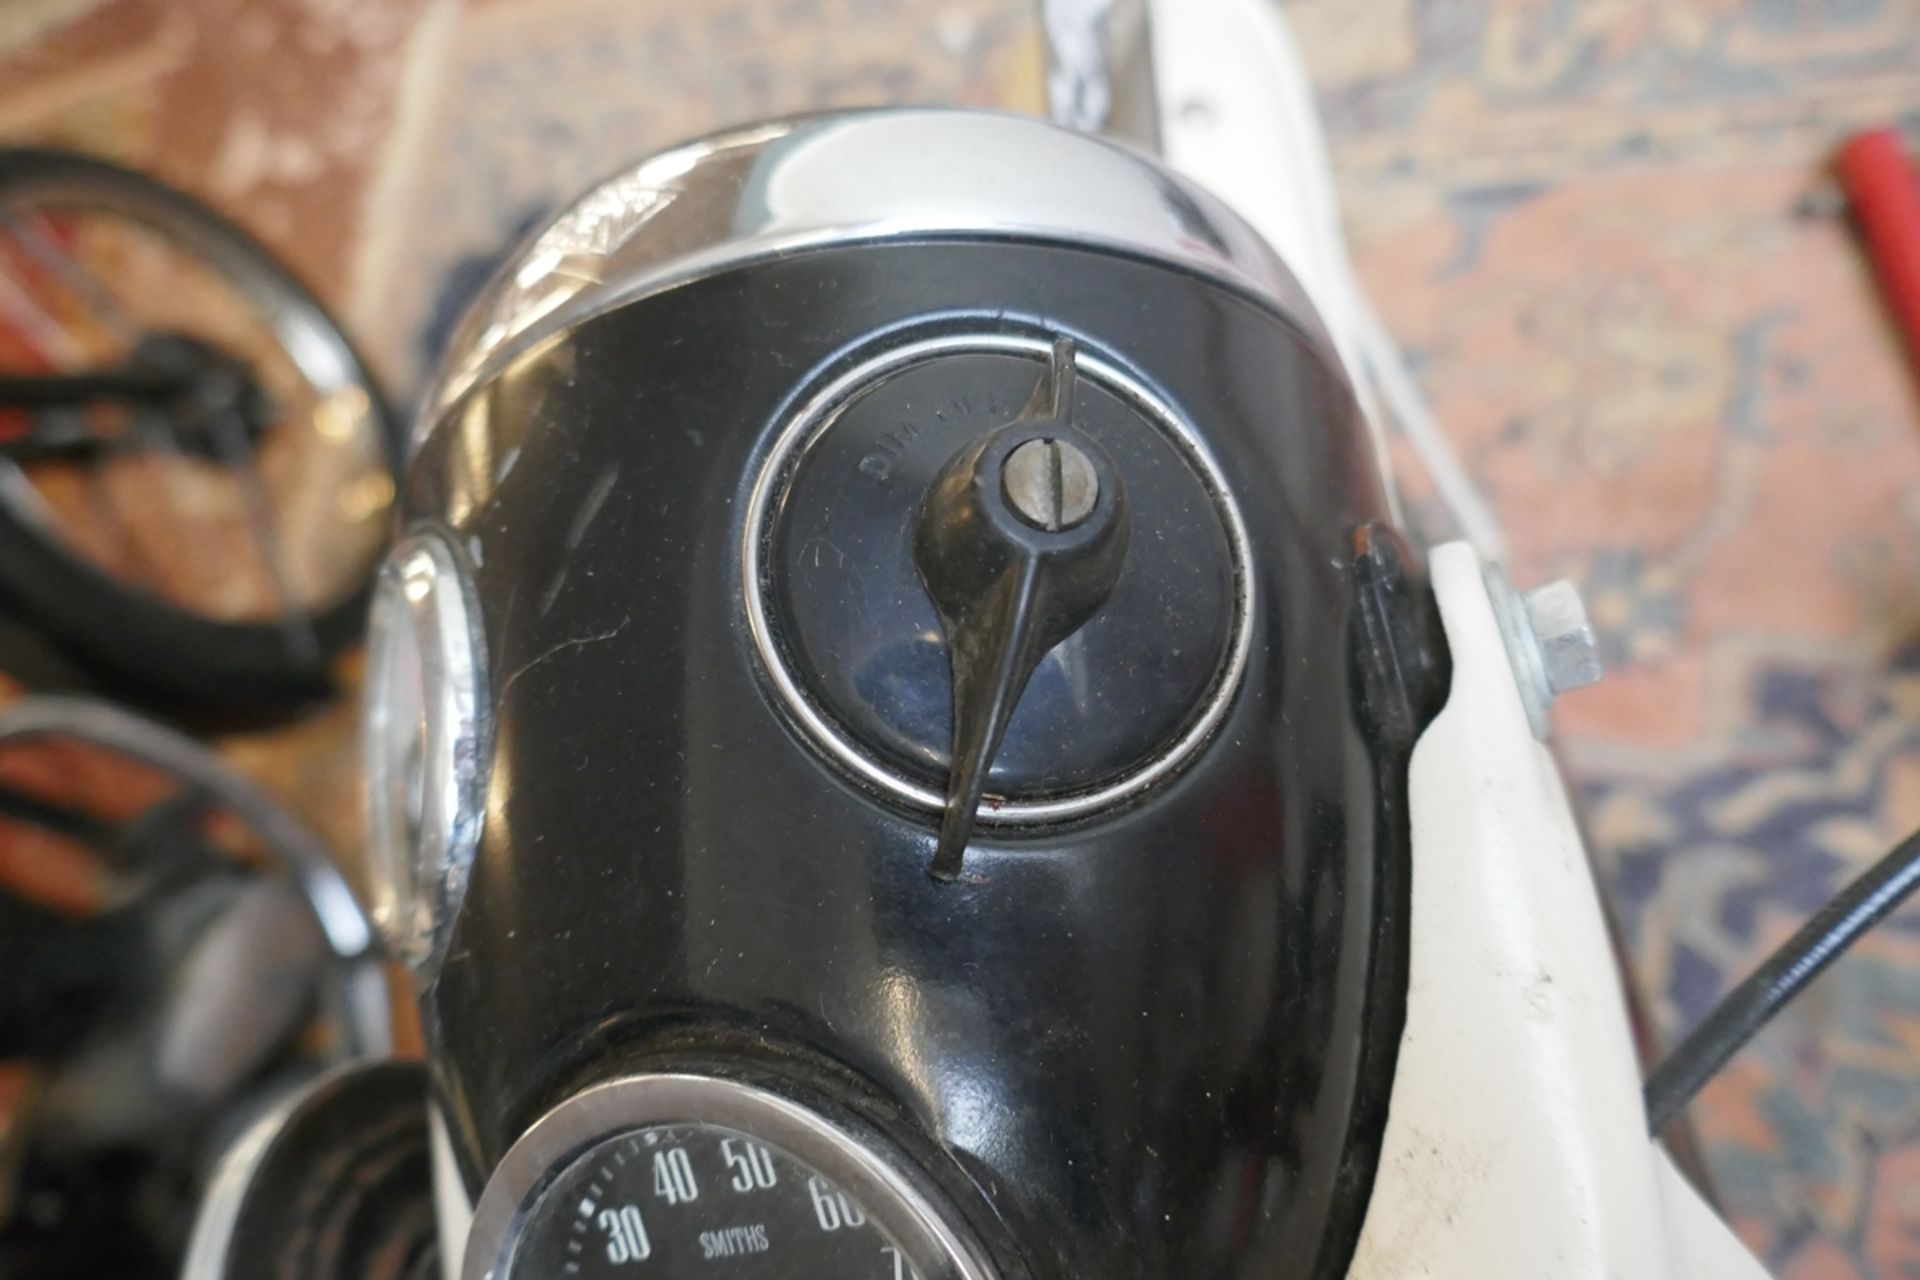 1961 Royal Enfield Prince 150cc with just 1600 miles from new - Image 13 of 35